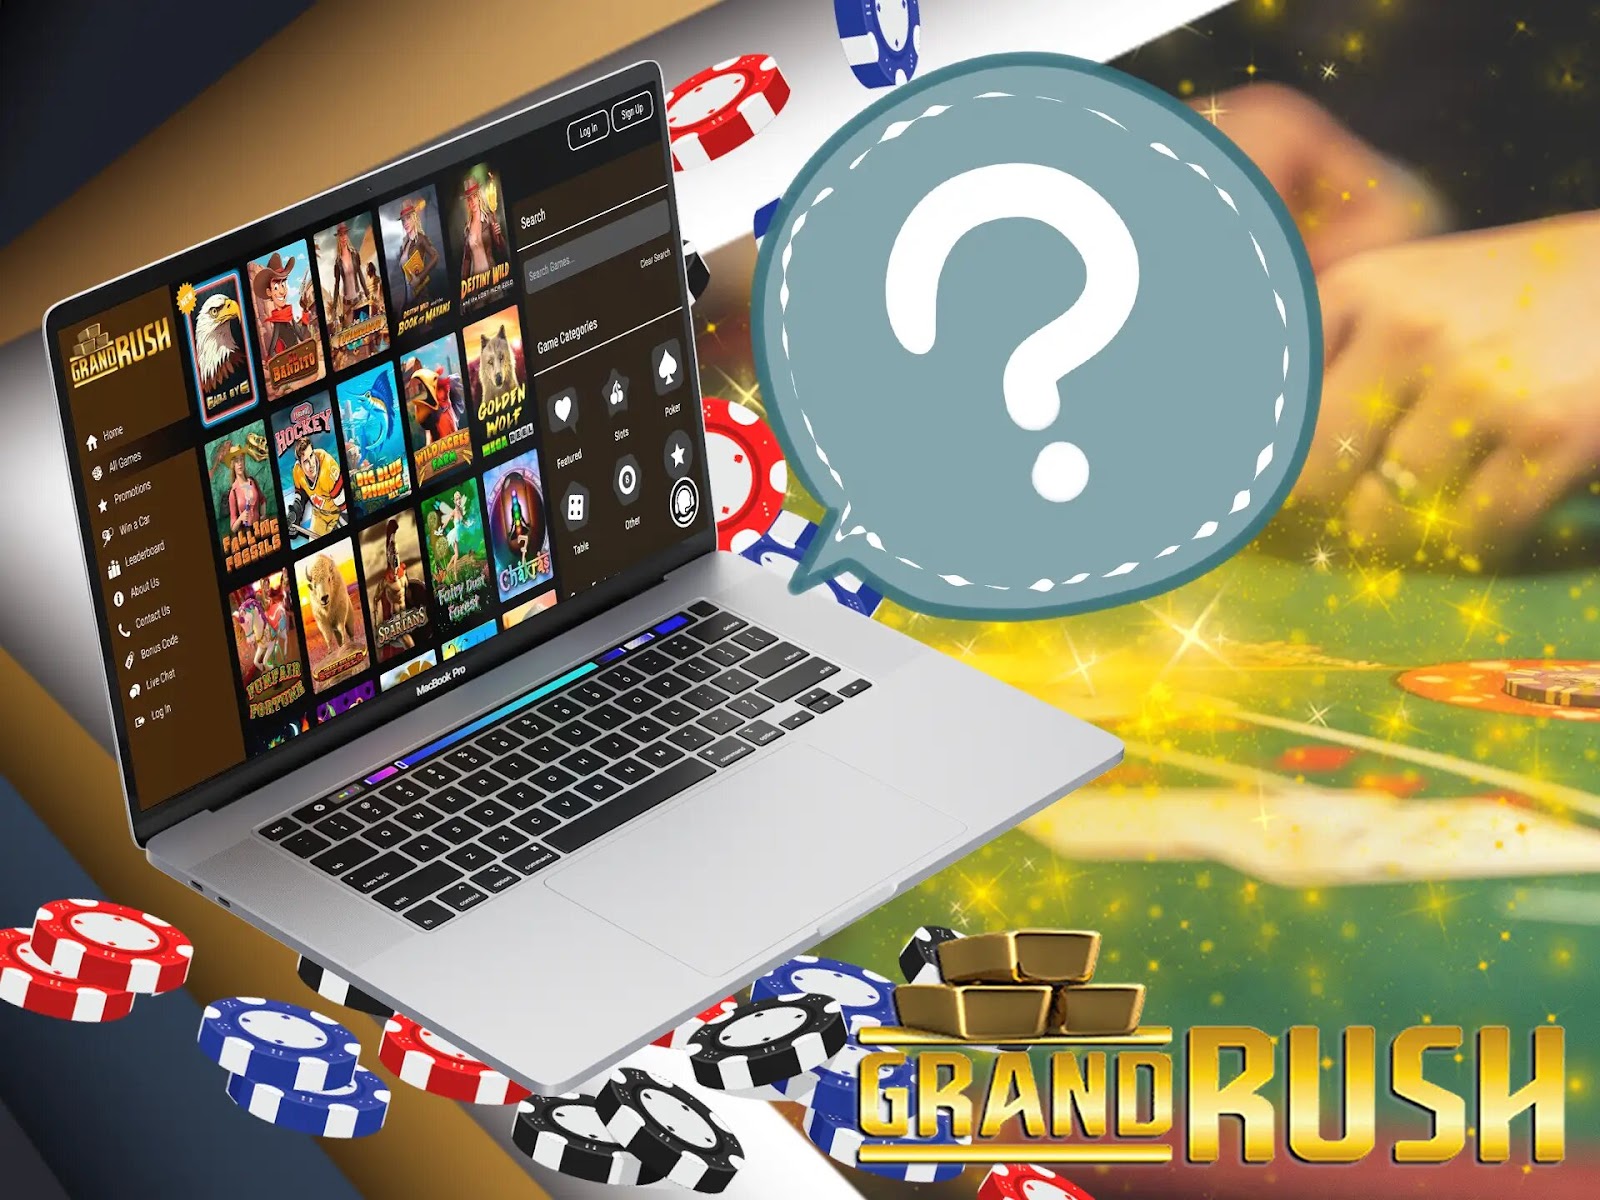 How to Use a Promo Code in the Grand Rush App?